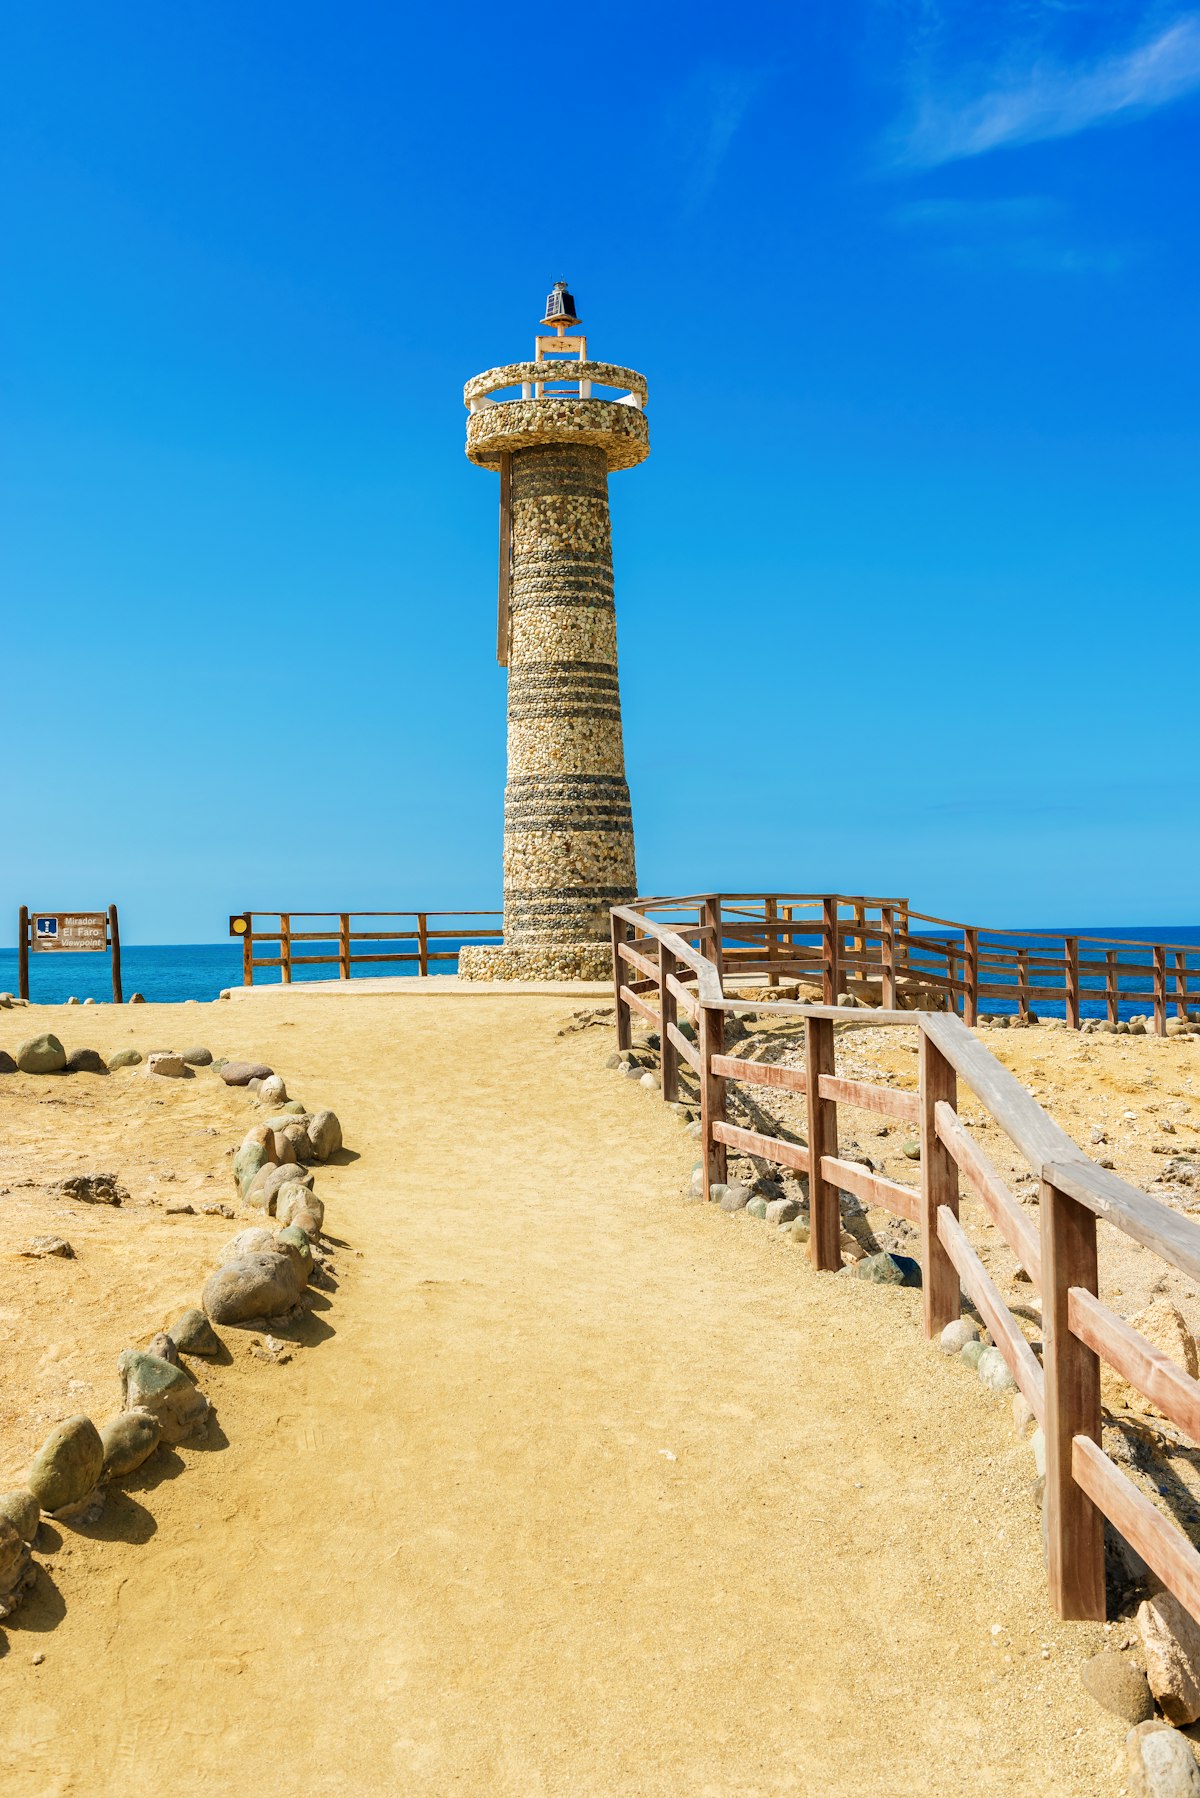 Salinas, Ecuador - April 14, 2016: The lighthouse at La Chocolatera, the point of land that sticks furthest out into the Pacific Ocean from Ecuador. ; Shutterstock ID 436830718; your: Sloane Tucker; gl: 65050; netsuite: Online Editorial; full: POI
436830718